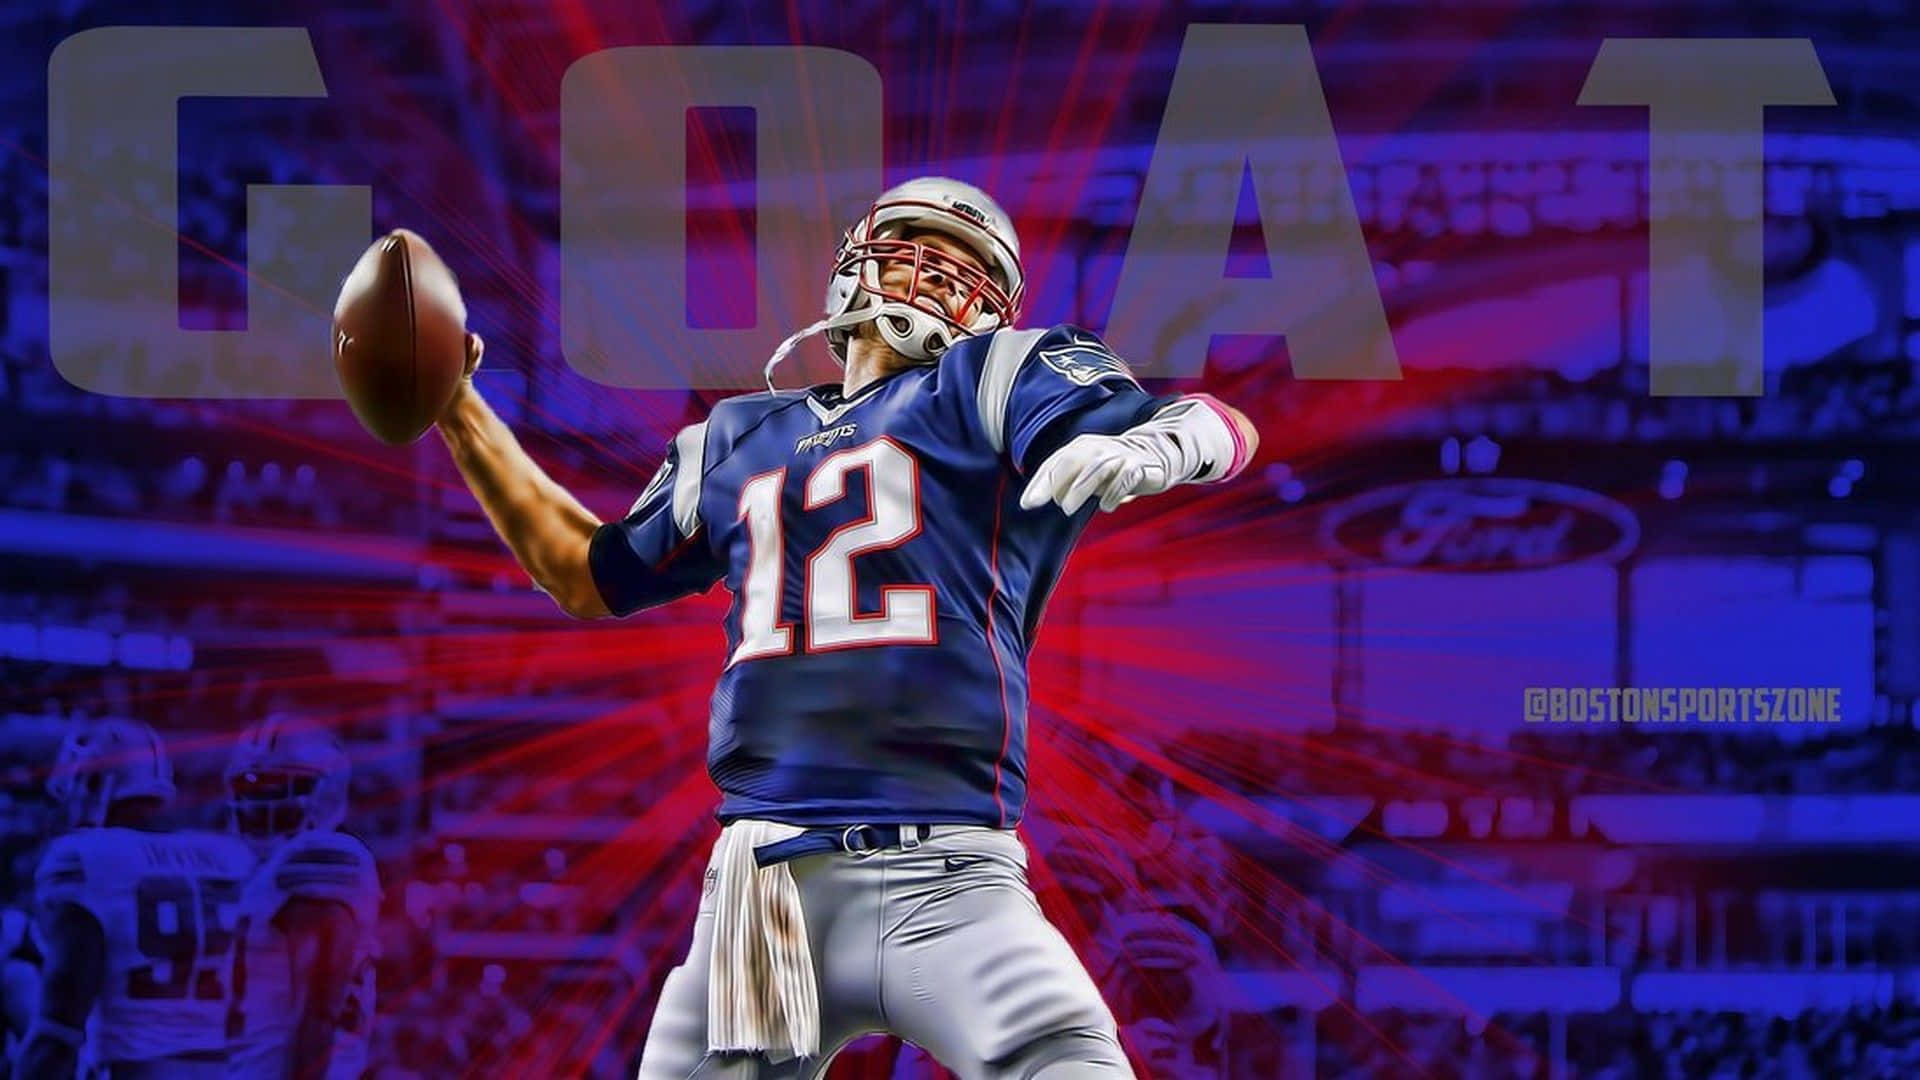 Show your Patriot spirit by customizing your desktop background Wallpaper